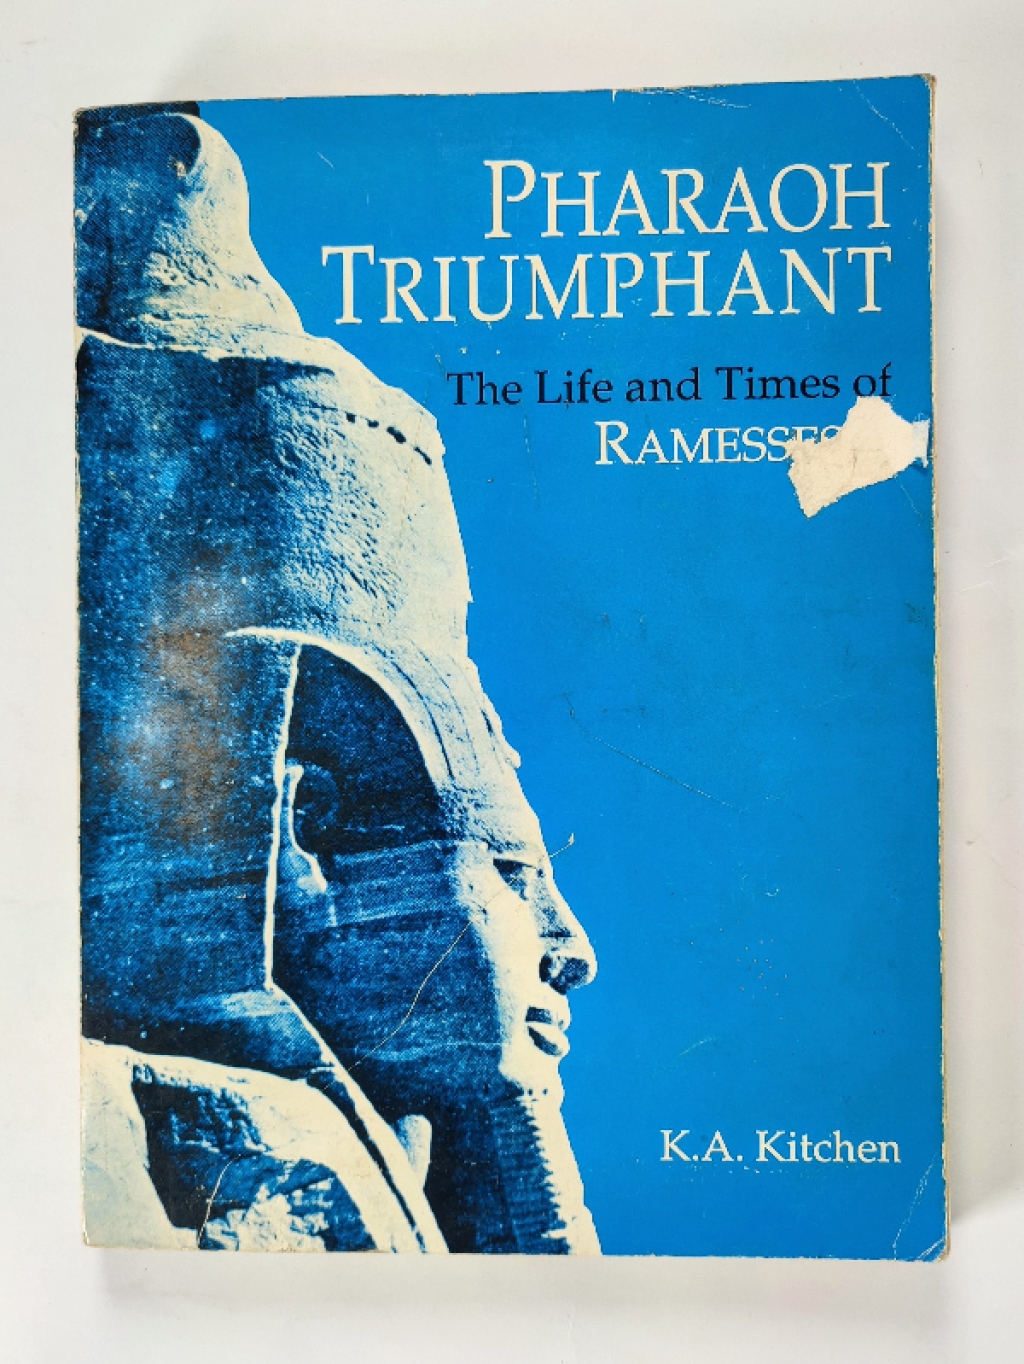 Pharaoh Triumphant. The Life and Times of Ramesses II